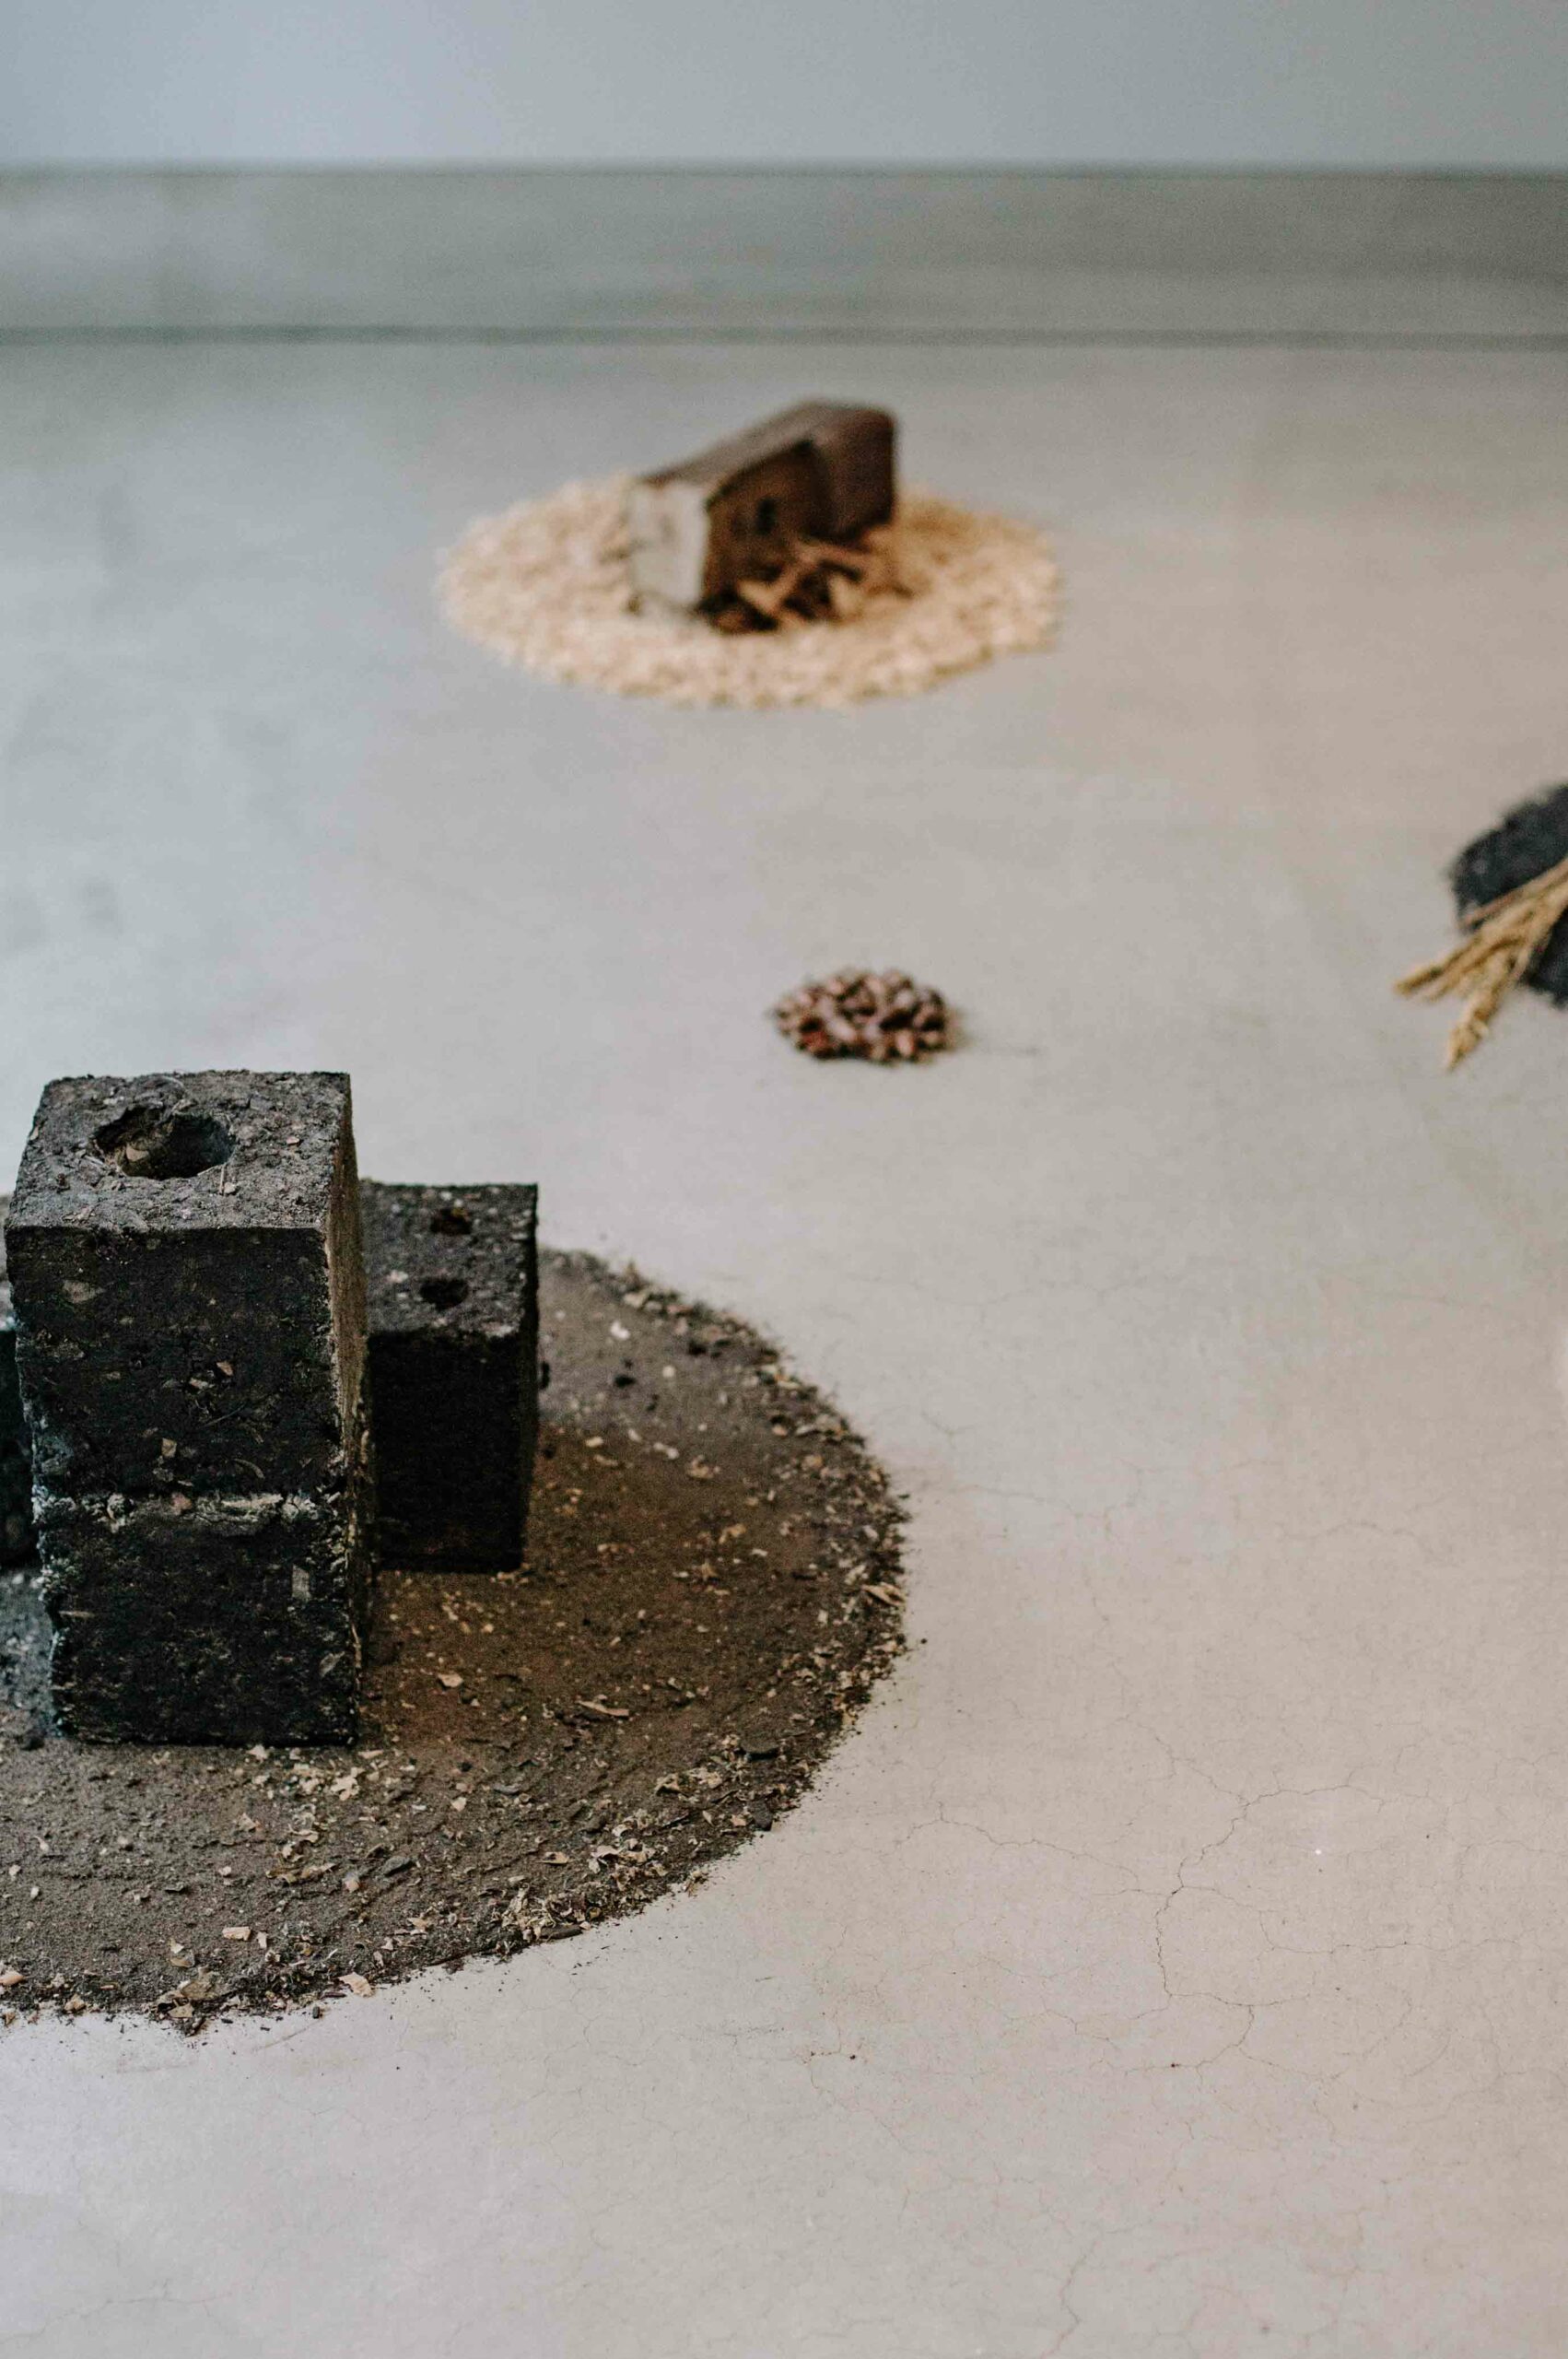 Used materials have been arranged on the gallery's concrete floor. The exhibition aims to question the amount of waste produced by humans.